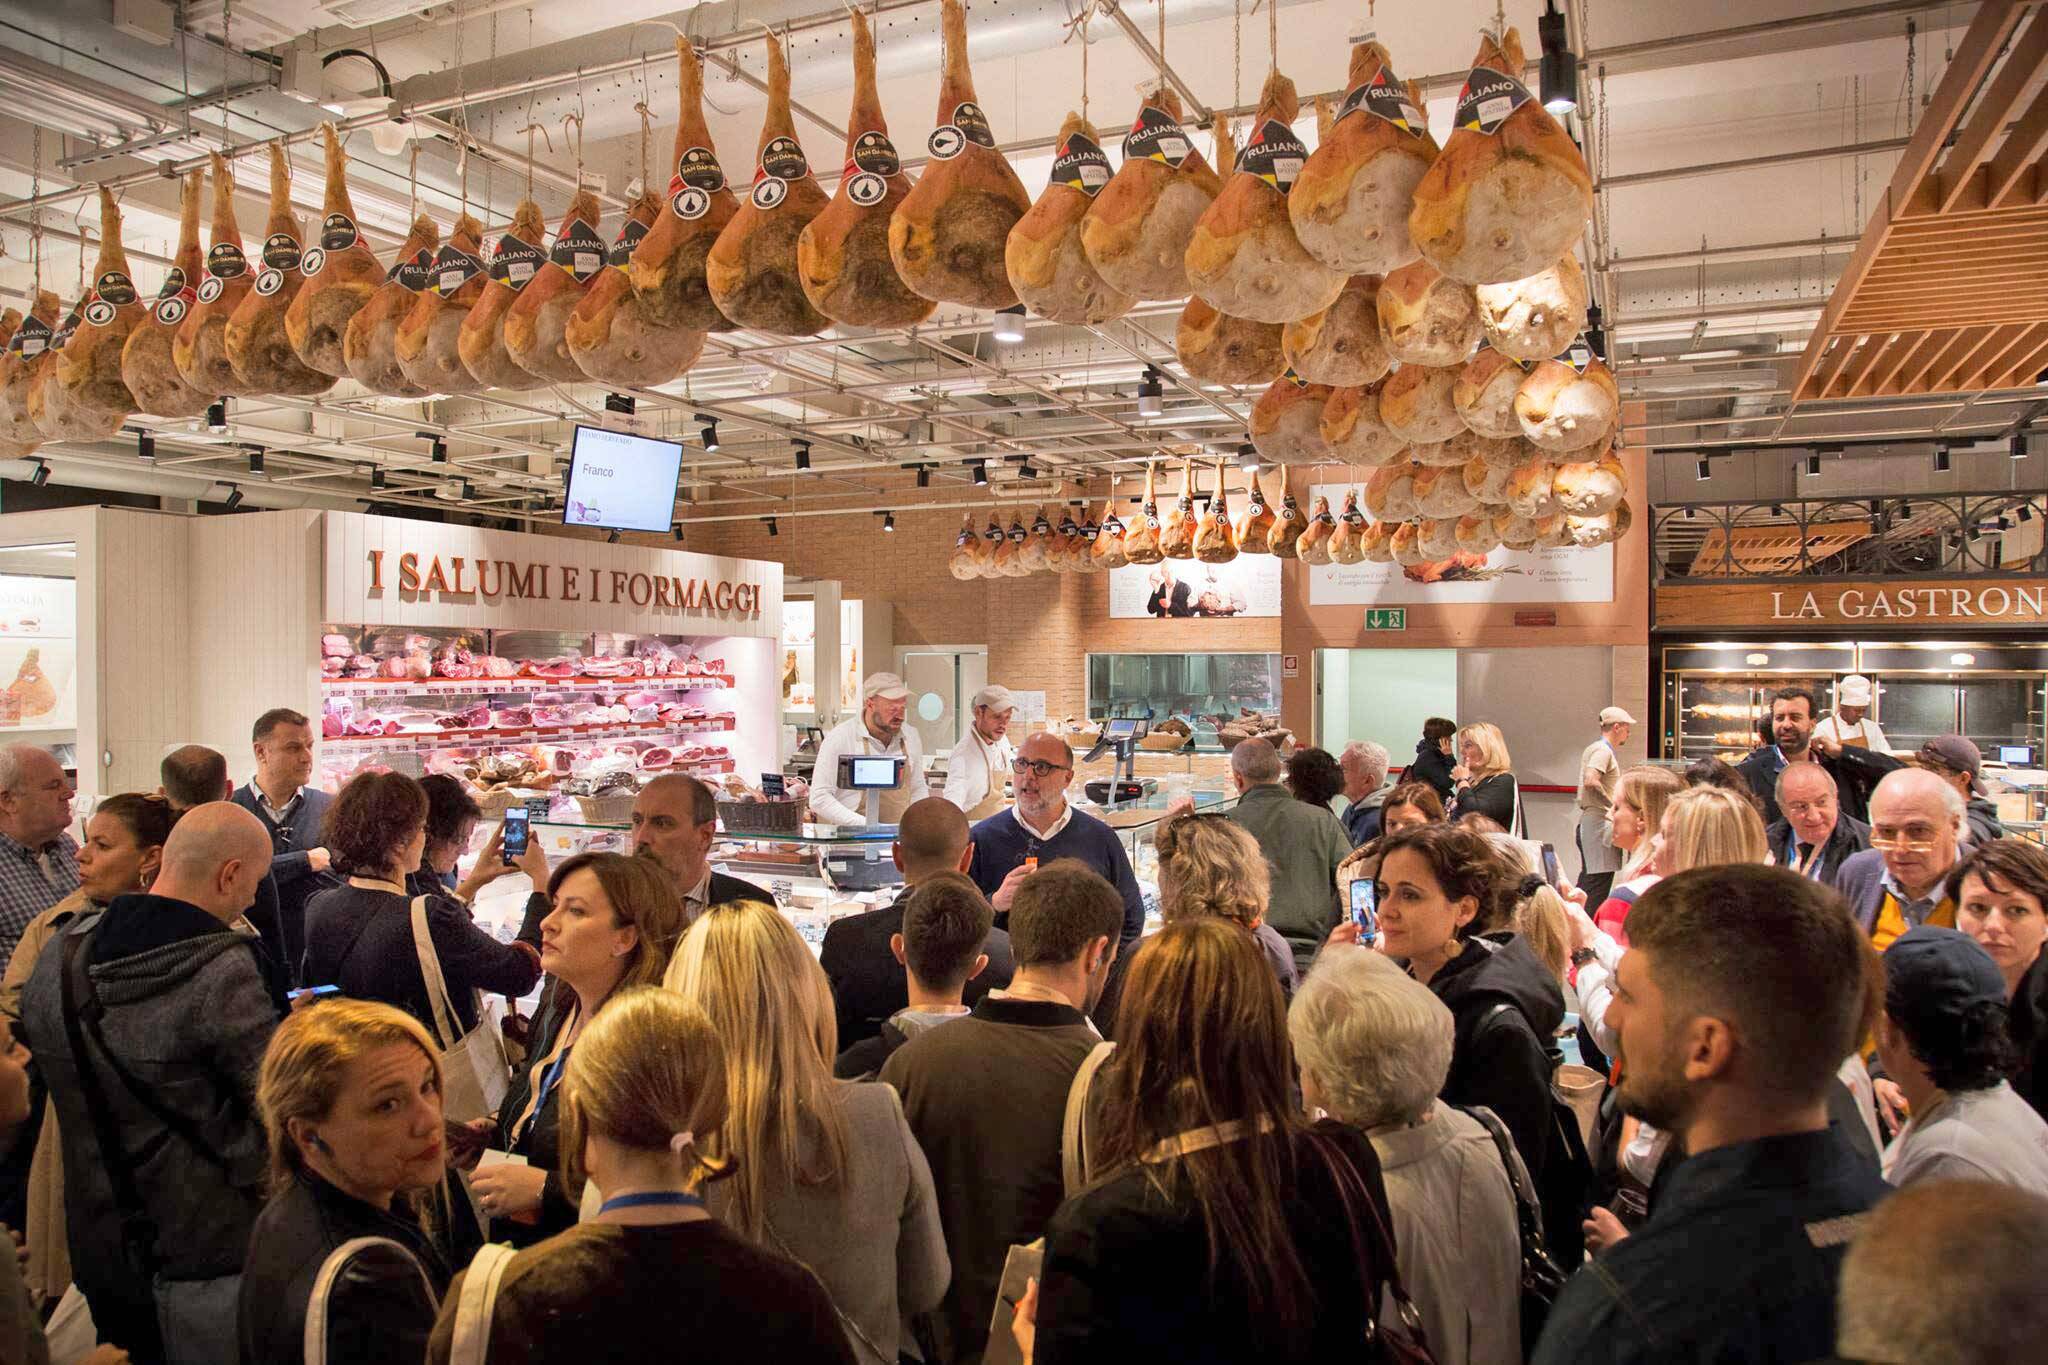 Eataly's first Toronto location is opening later this year